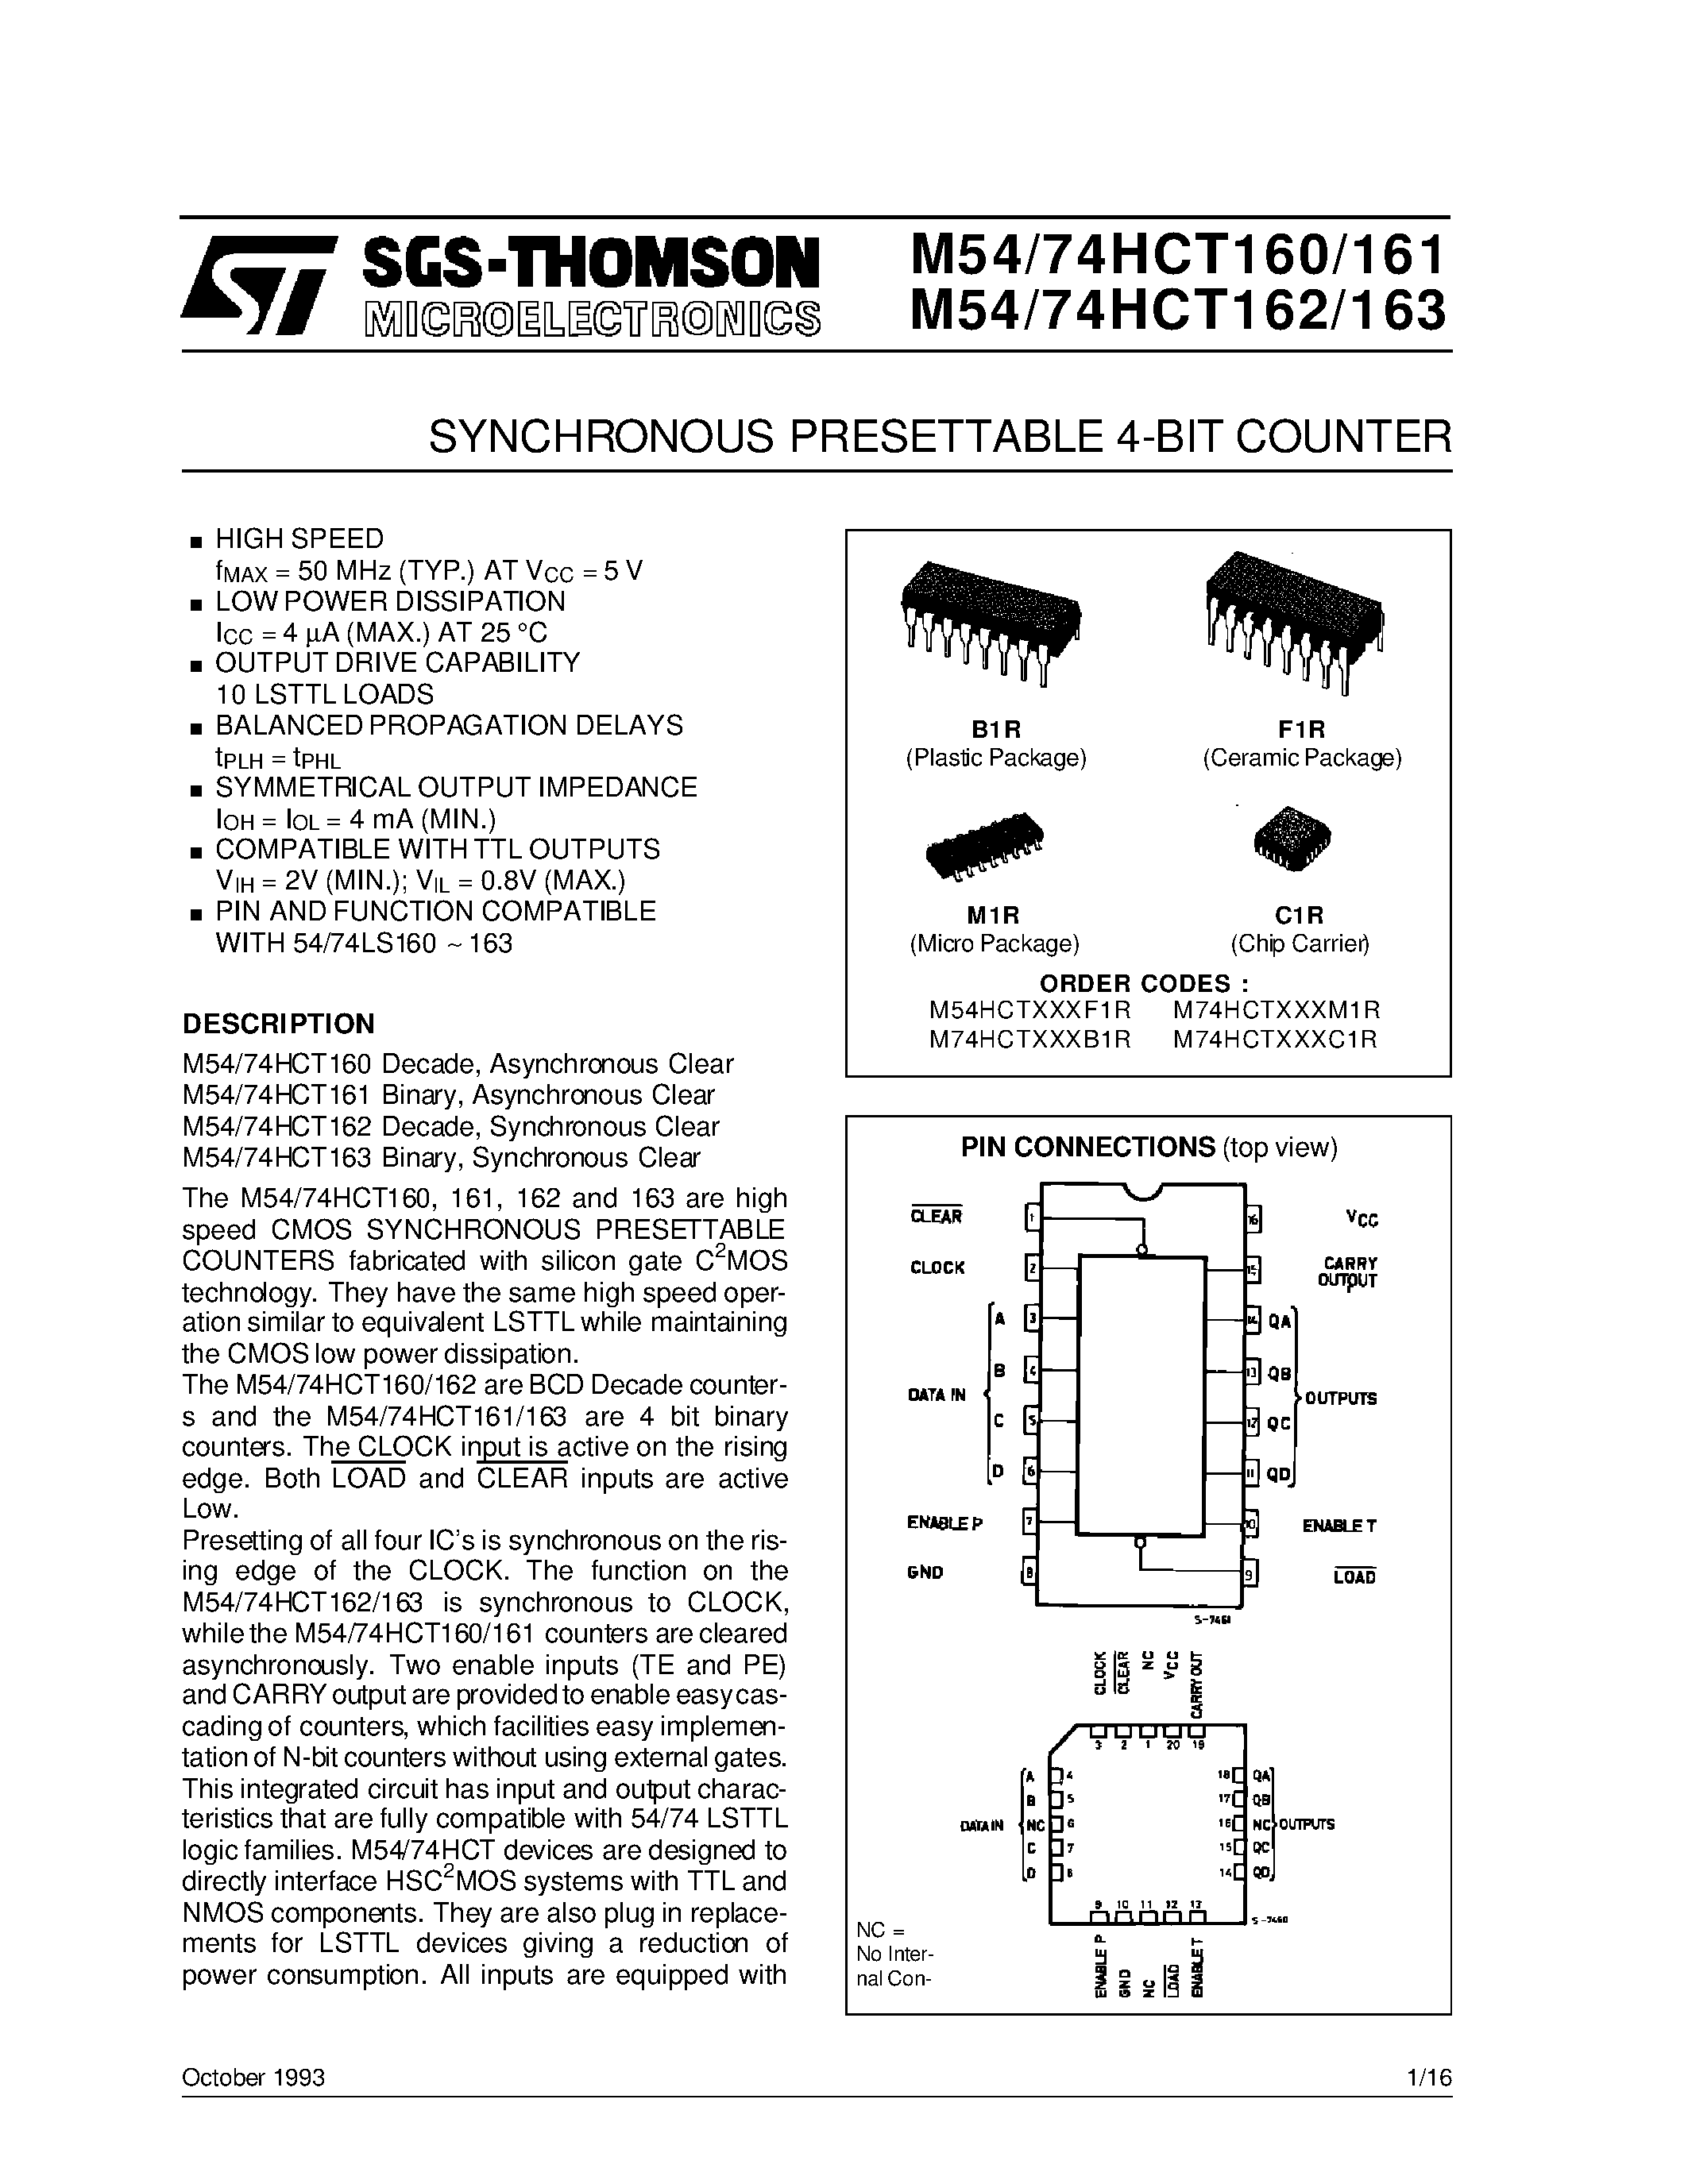 Datasheet M74HCT161 - SYNCHRONOUS PRESETTABLE 4-BIT COUNTER page 1